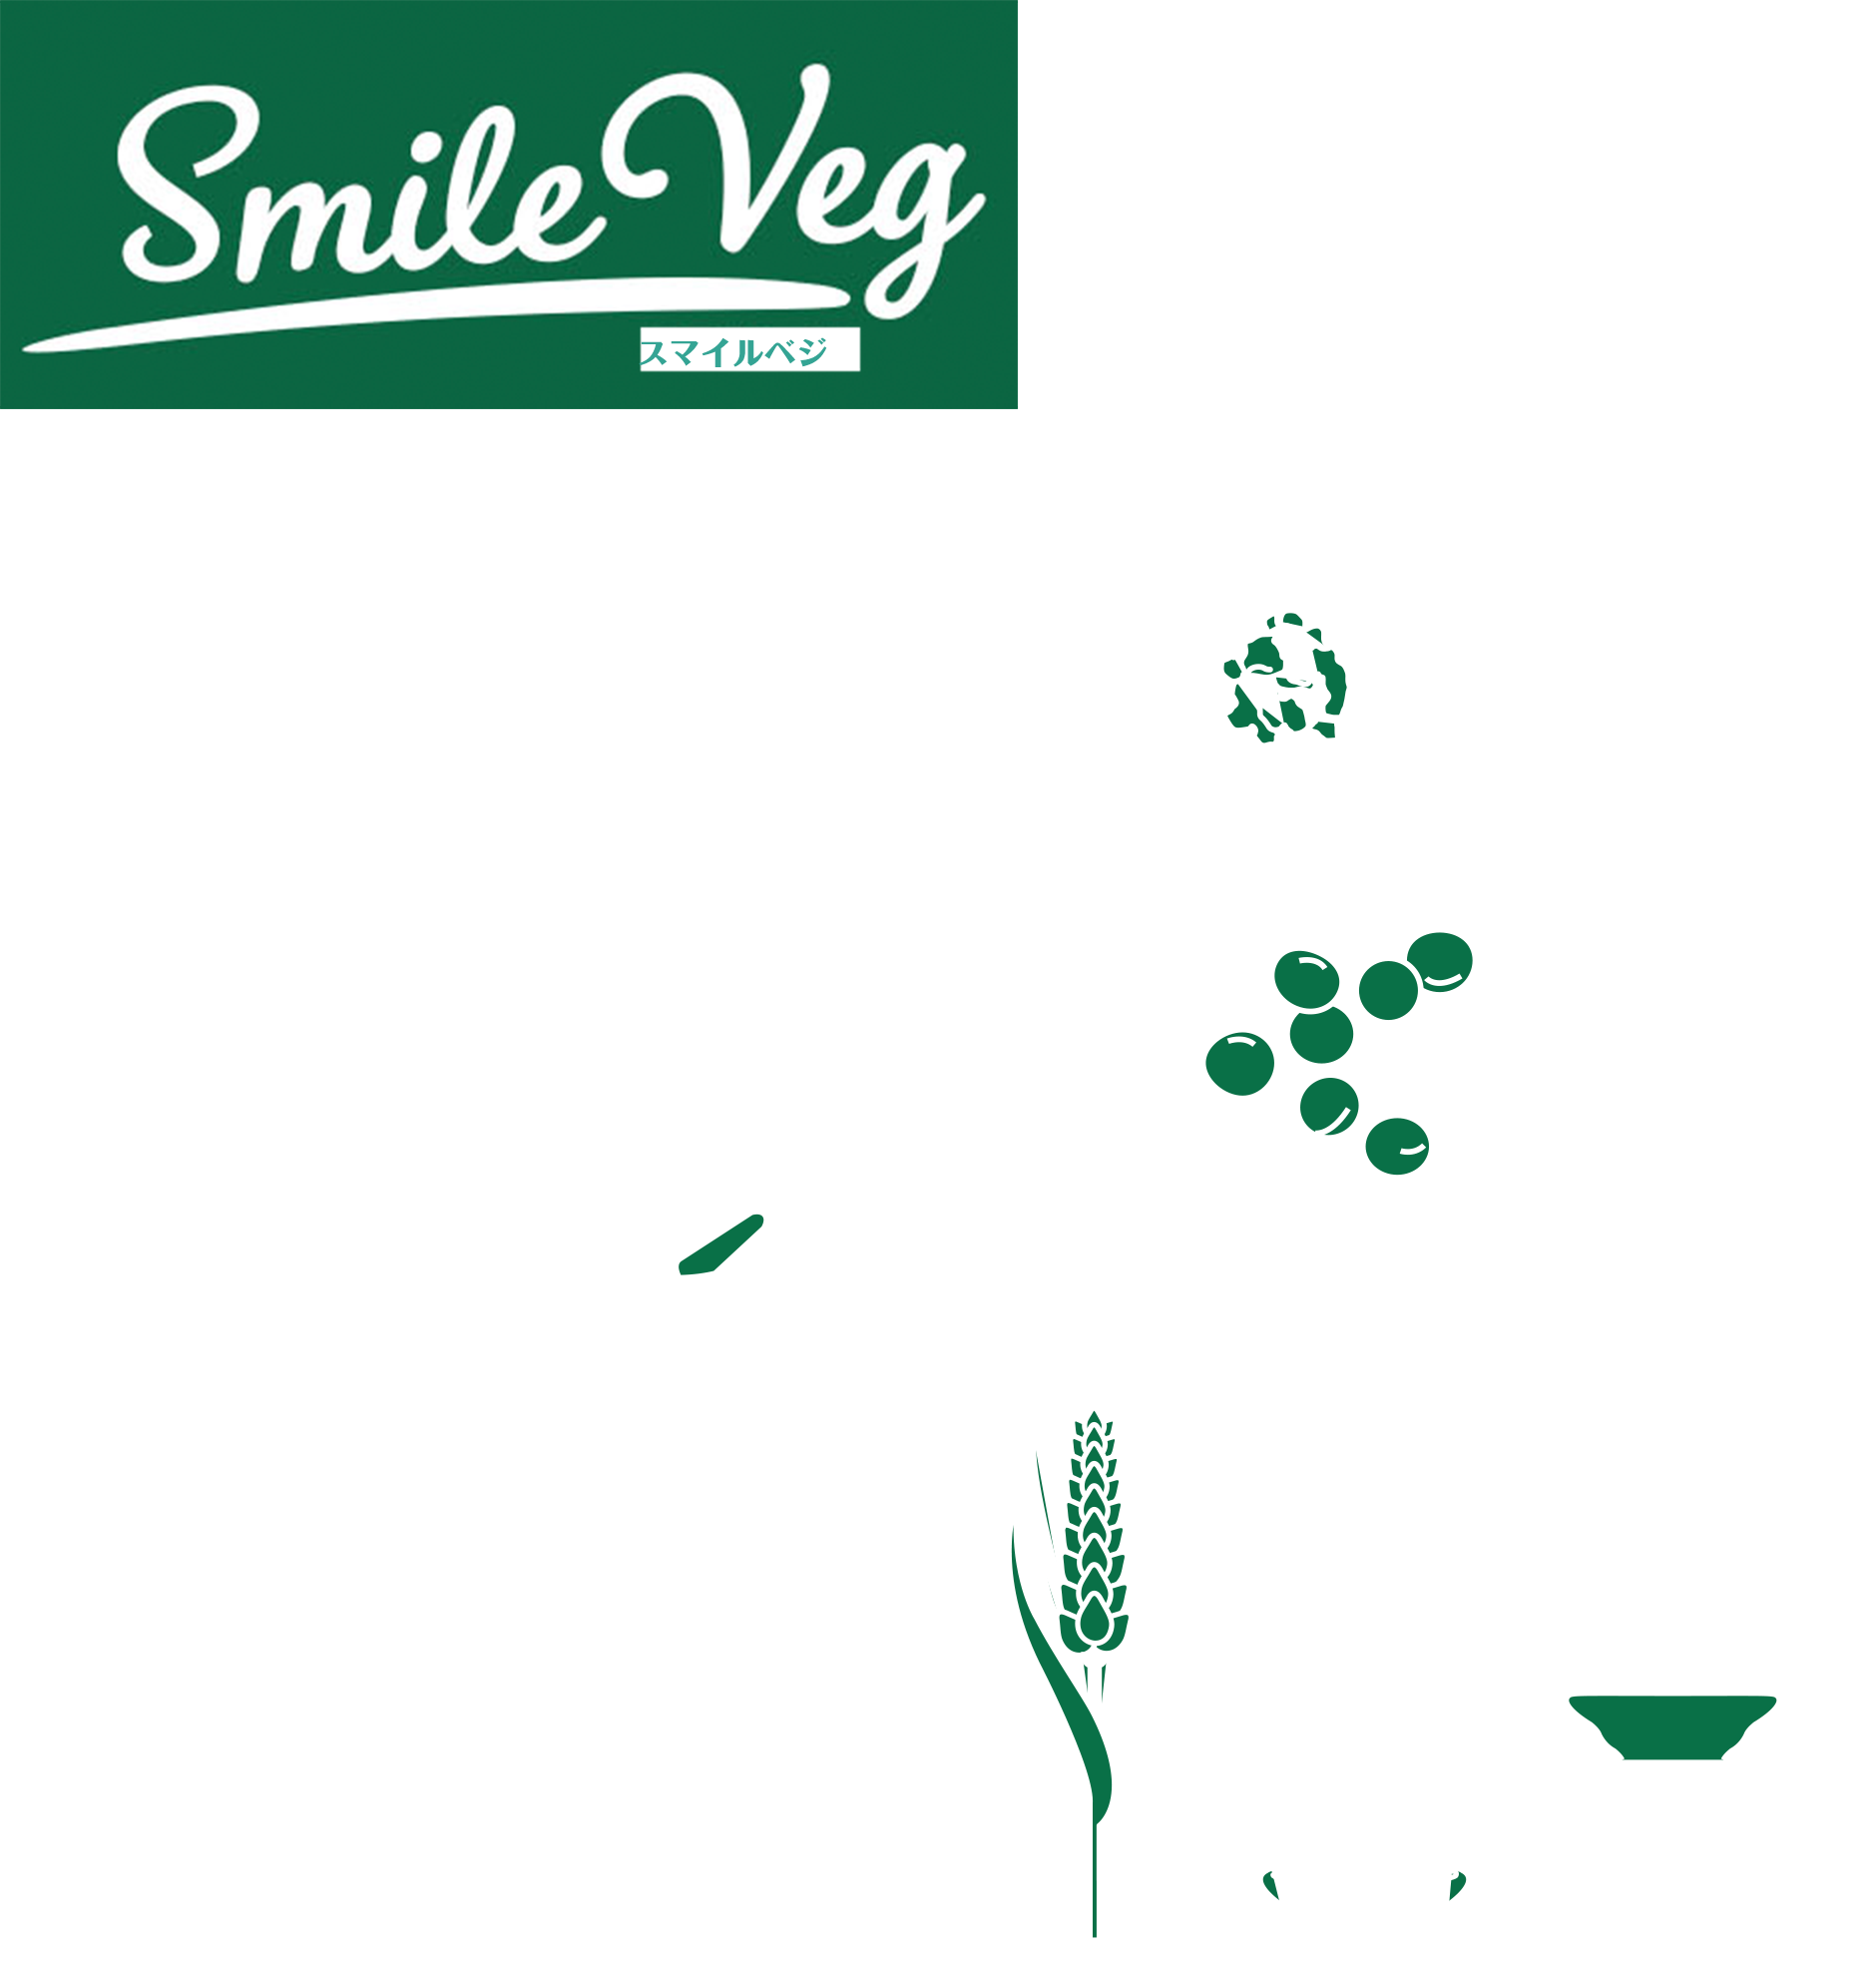 Smile Beg スマイルベジ｜Soup,Soy,Noodle